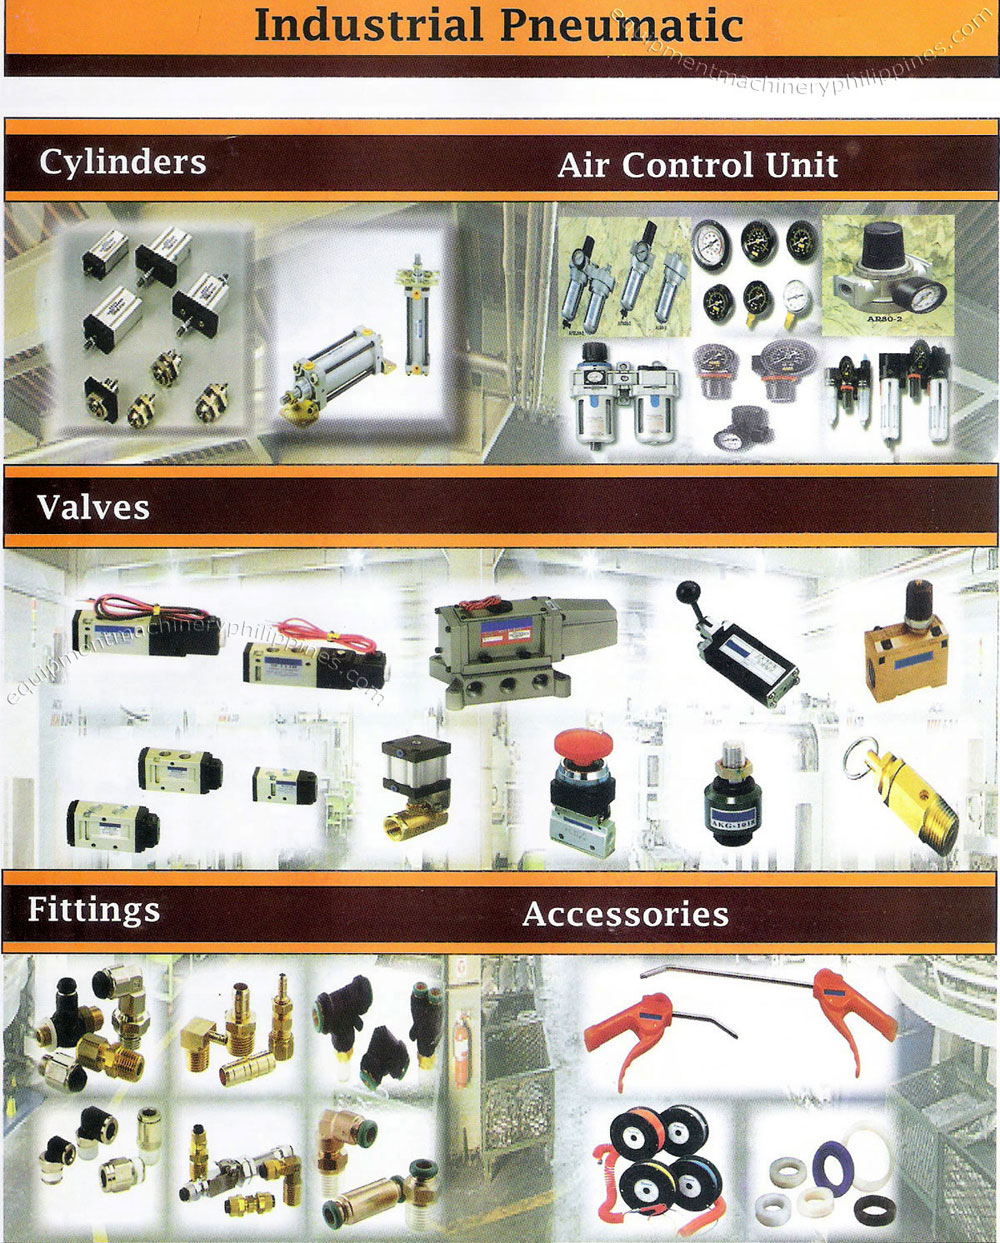 Industrial Pneumatic: Cylinders, Air Control Unit, Valves, Fittings, Accessories